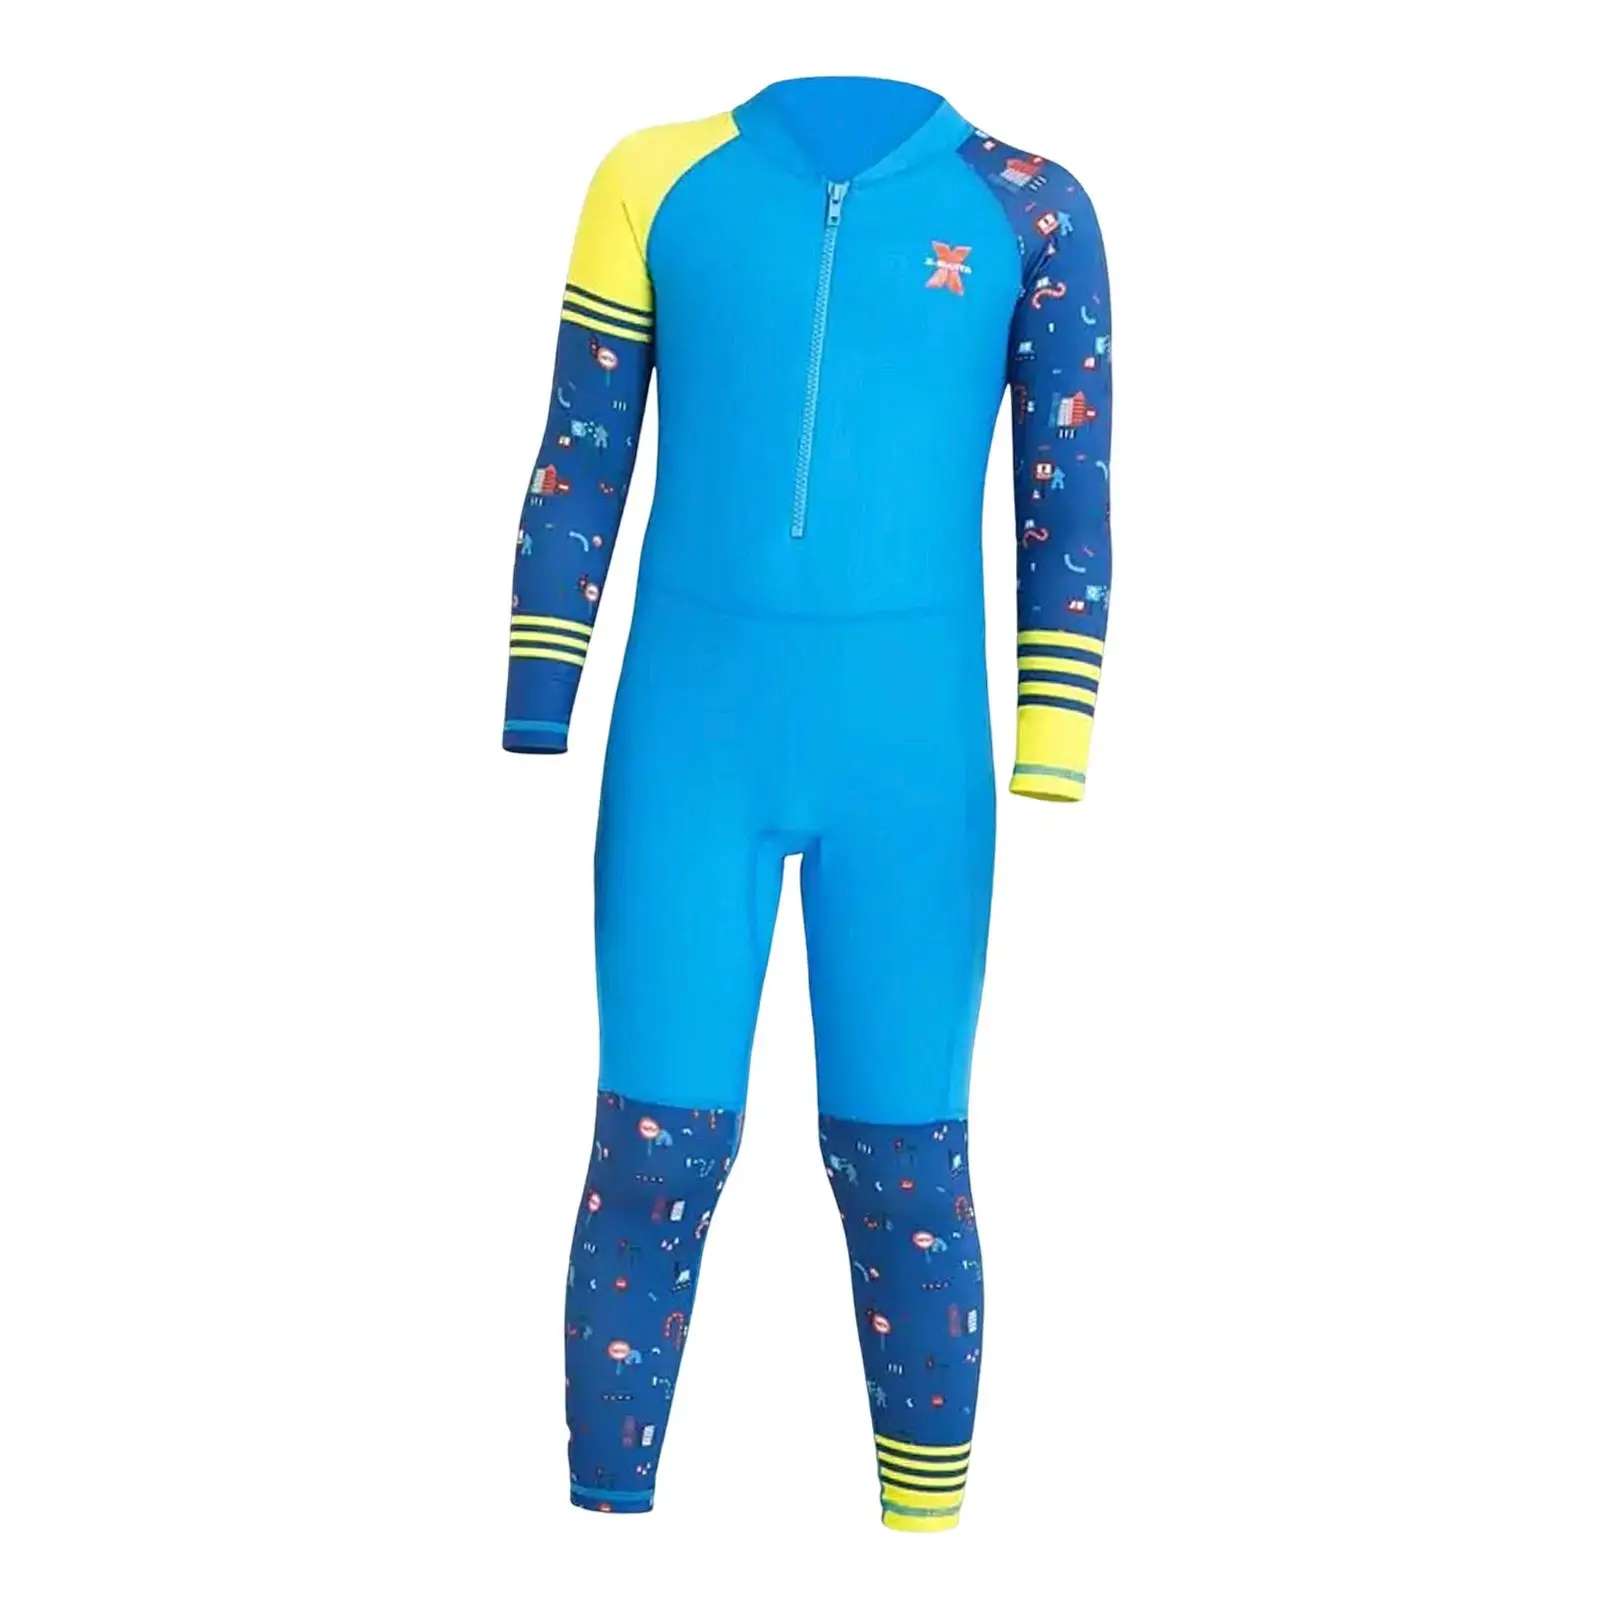 Kids Wetsuit Diving Swimsuits Waterproof Surfing Quick Drying Water Sports